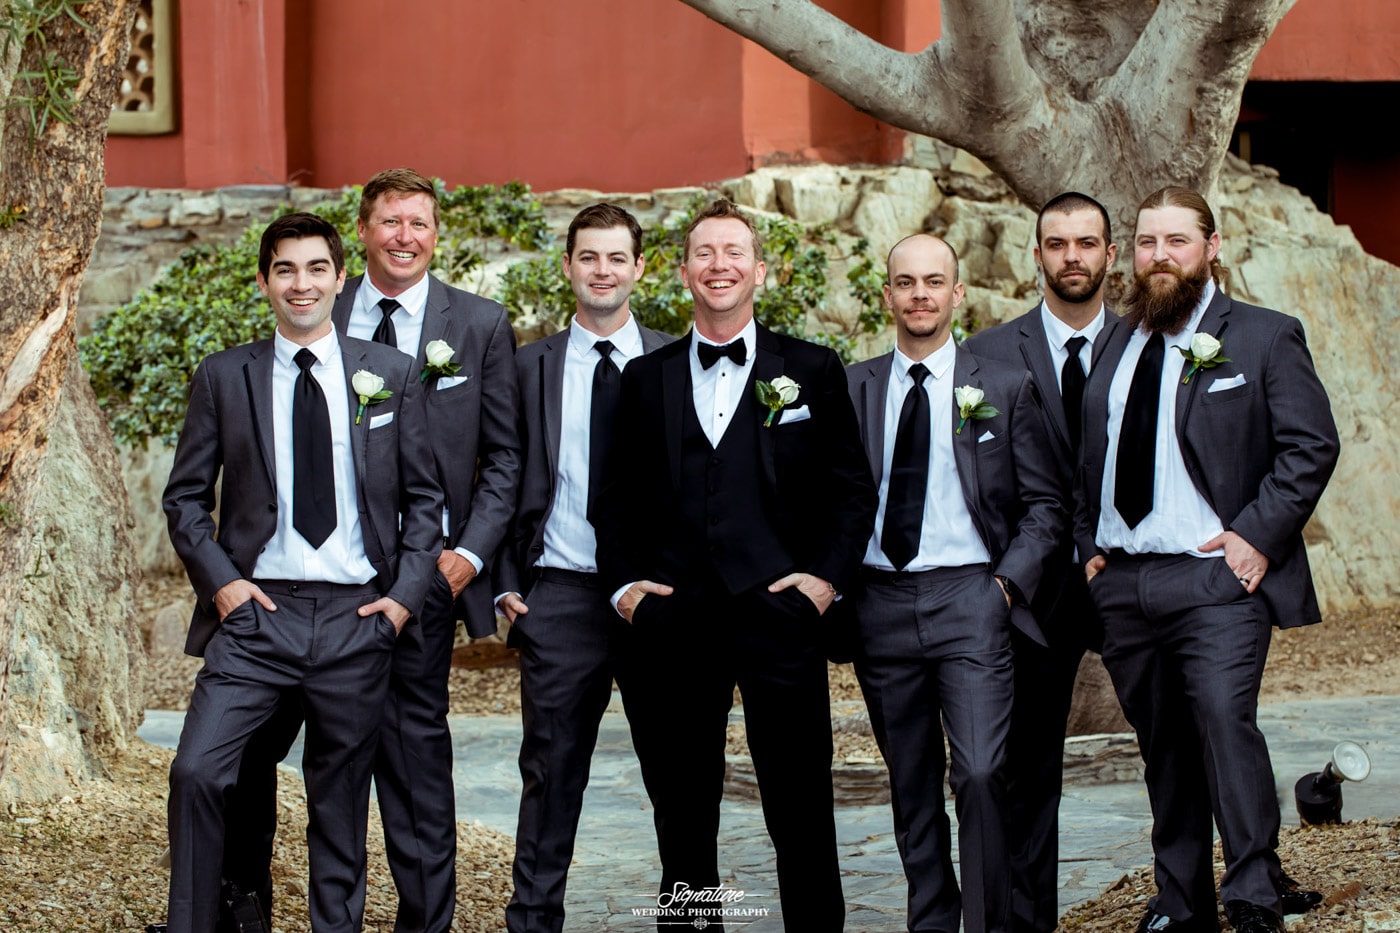 Groom and groomsmen smiling at camera outside